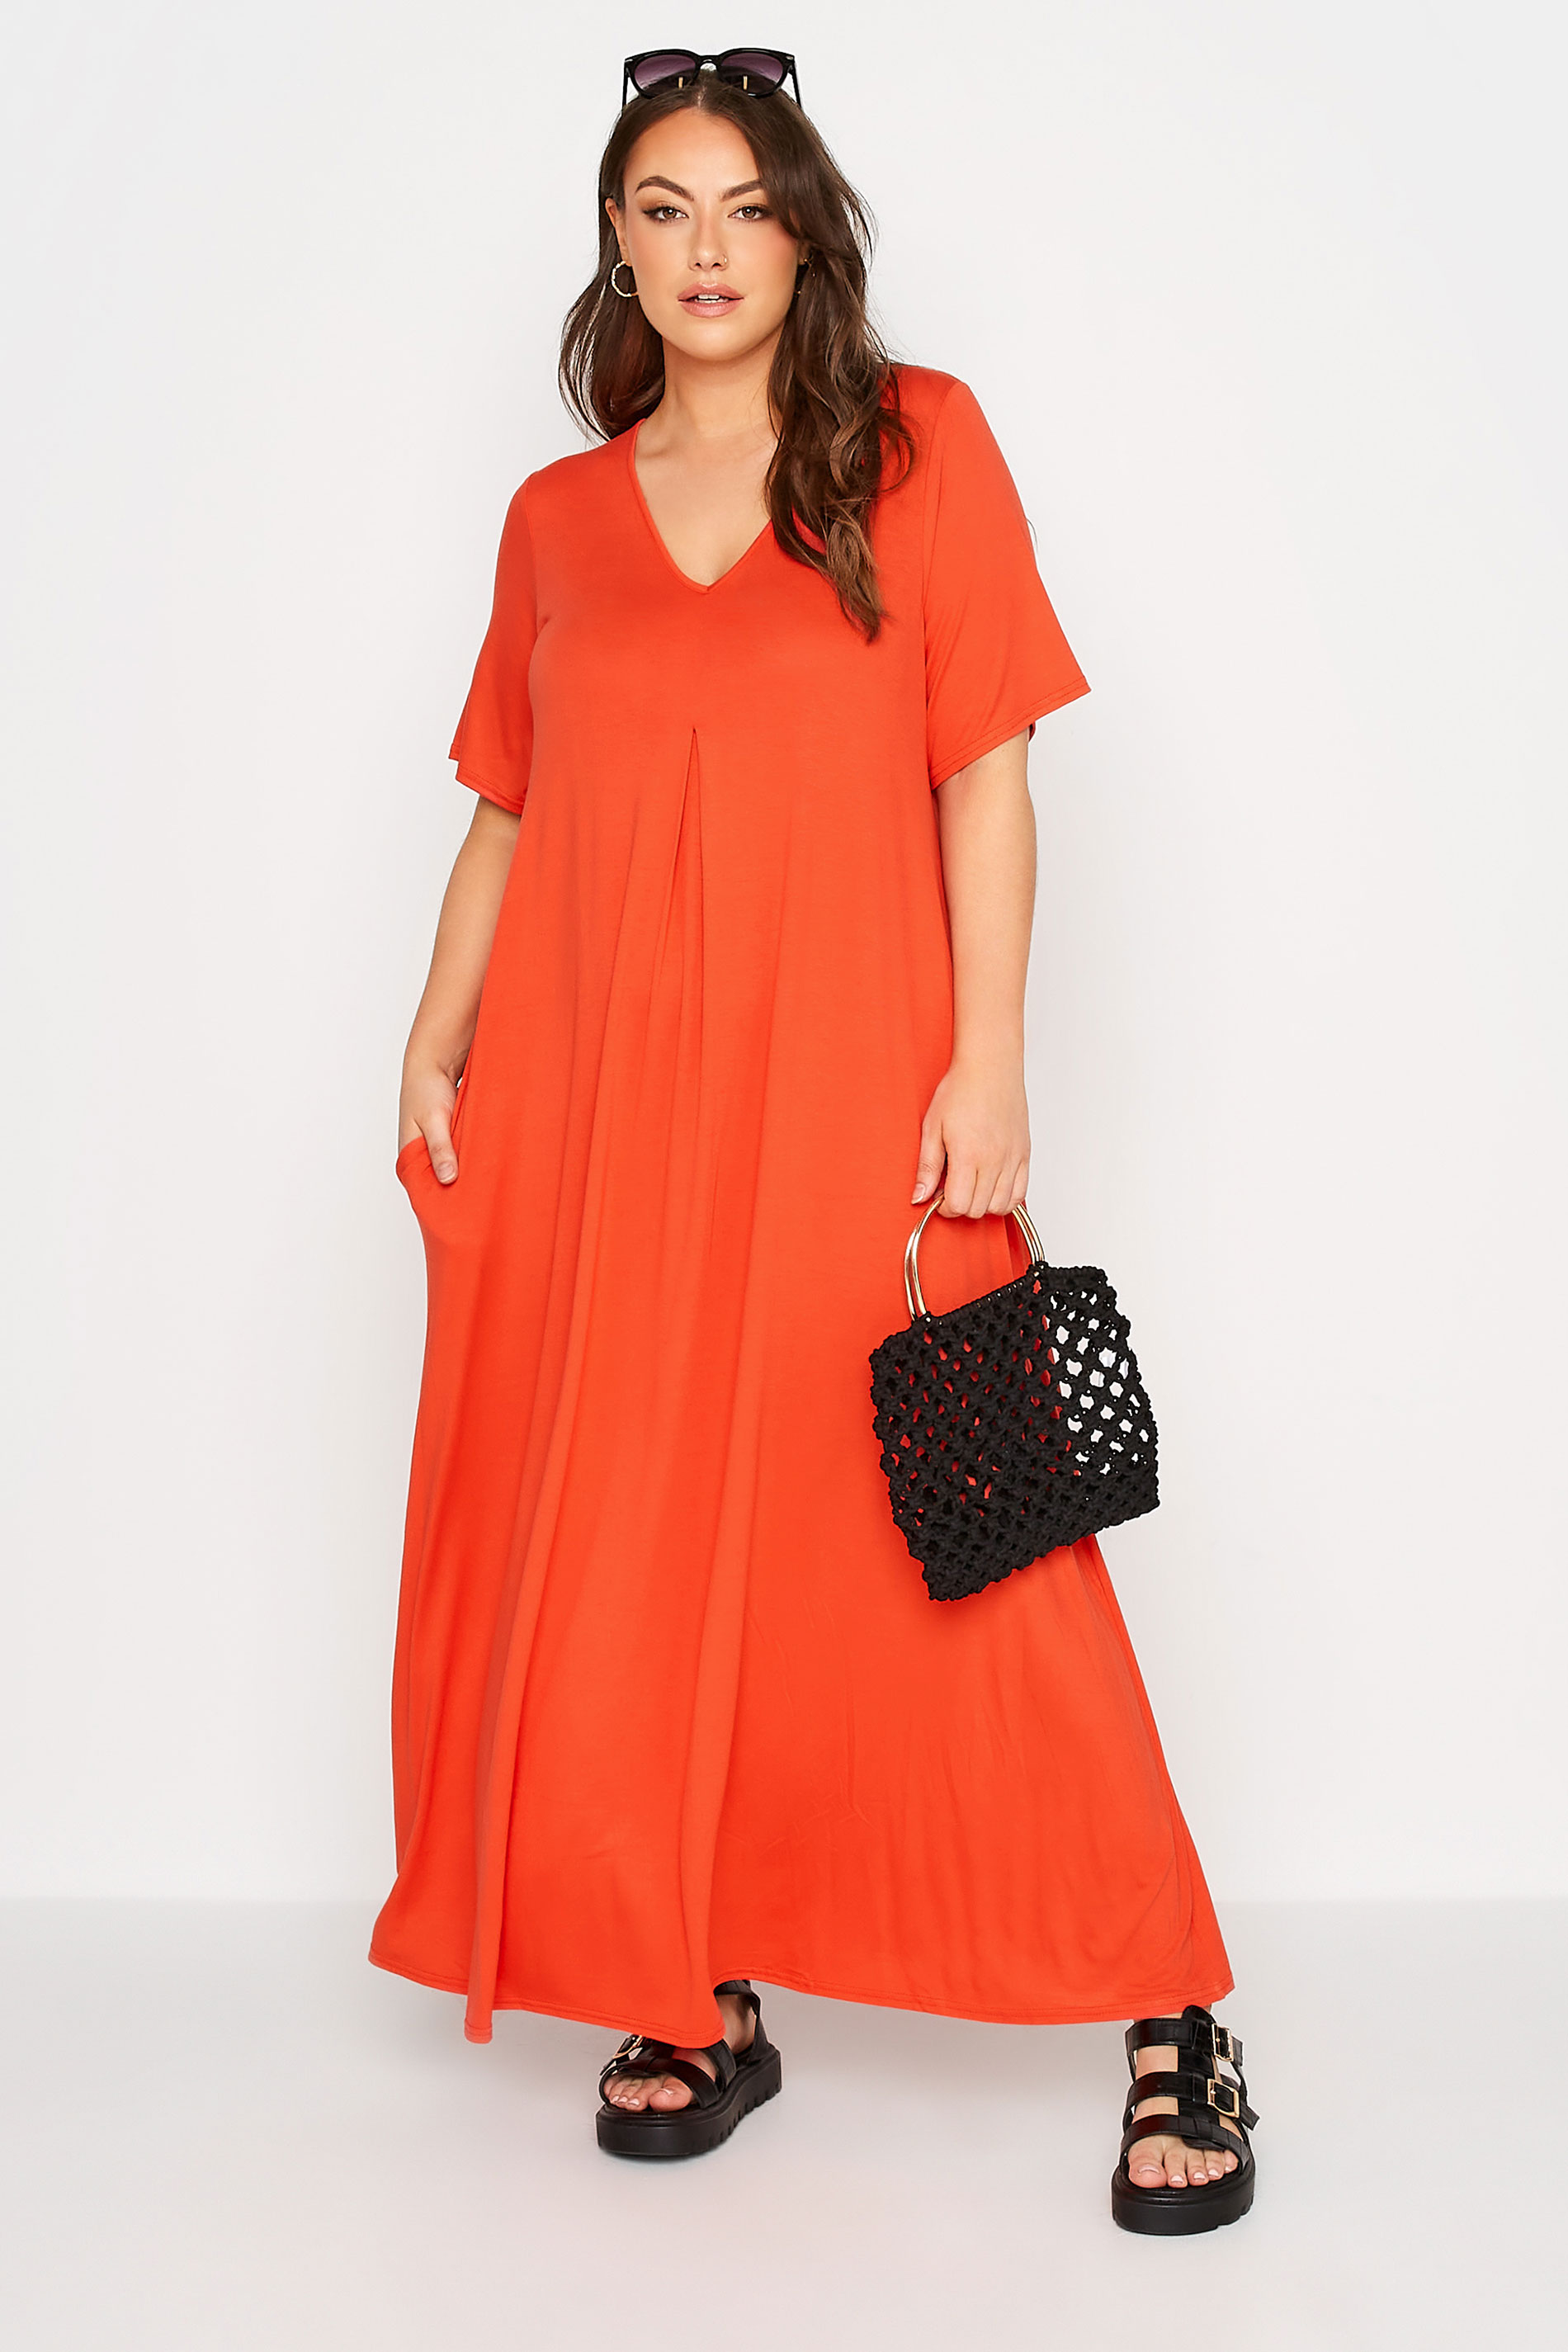 Robes Grande Taille Grande taille  Robes Longues | LIMITED COLLECTION - Robe Orange Maxi Plissée Manches Courtes - SK92731